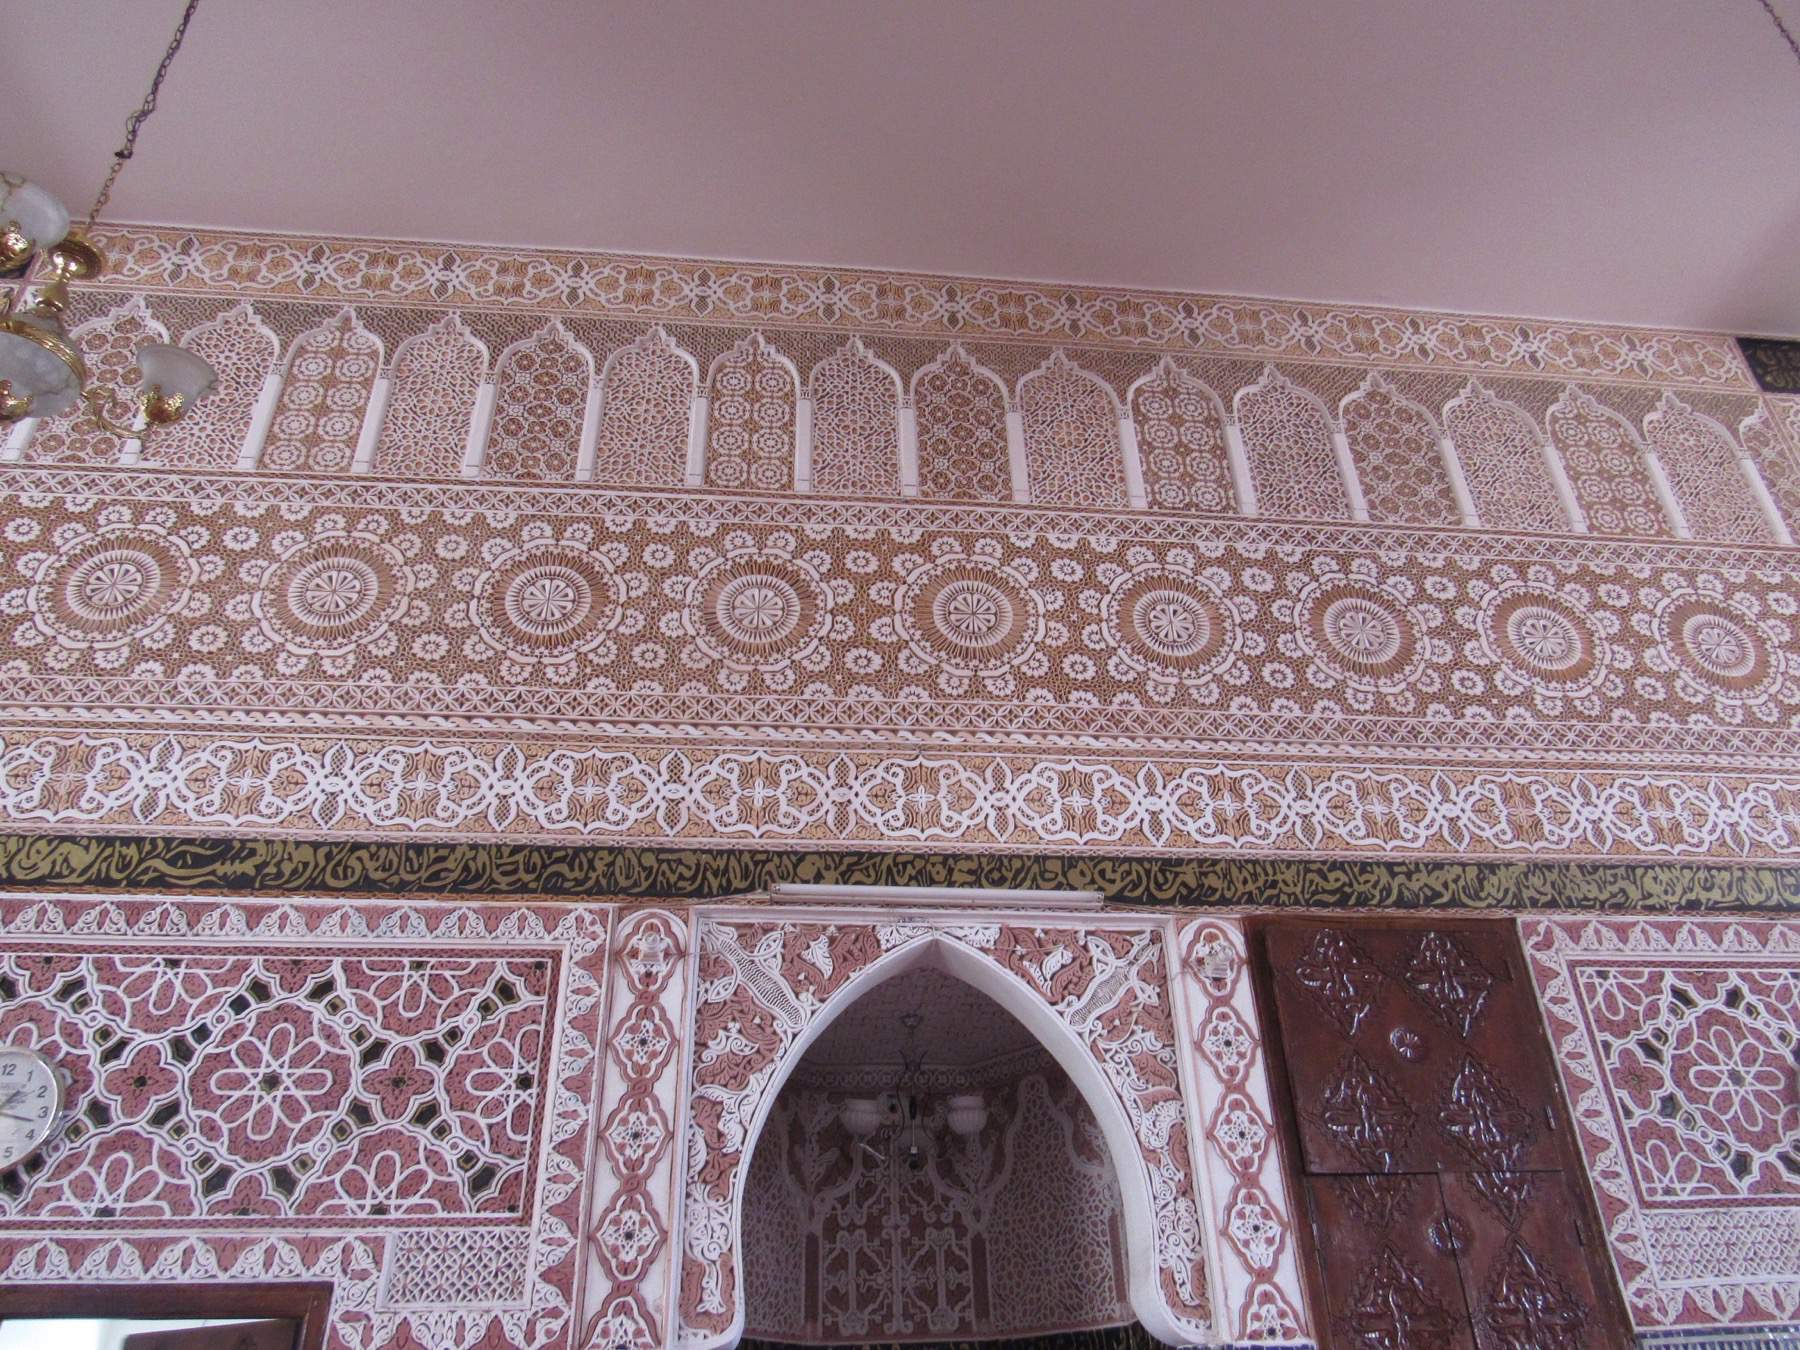 Interior view, toward stucco decorations above the mihrab